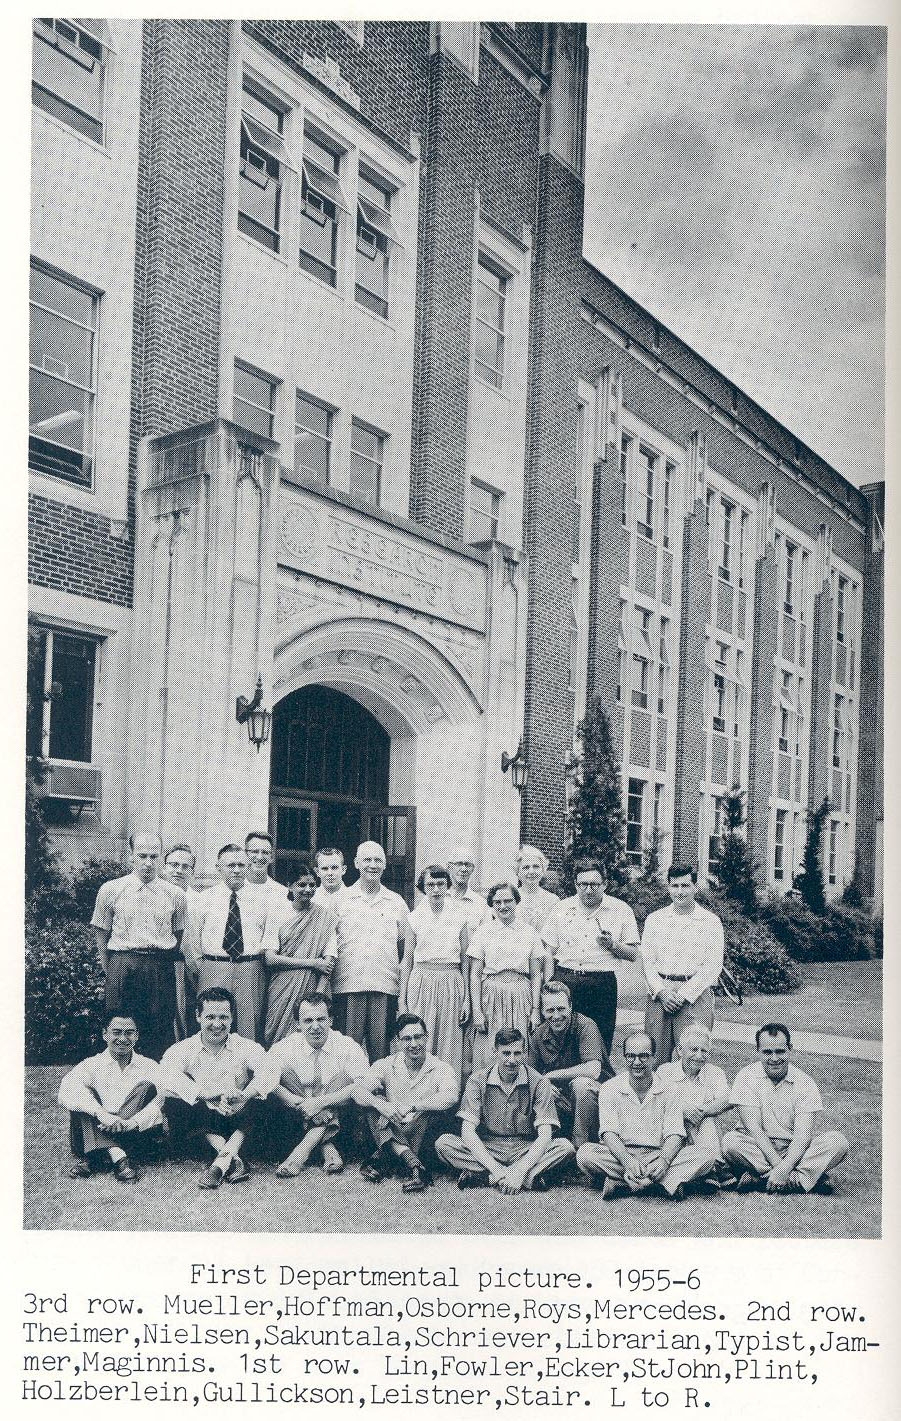 1955-1956 group photo in black and white, scanned in from Fowler book. Text under photo: "[First line] First Departmental picture. 1955-6 [Second line] 3rd row. Mueller, Hoffman, Osborne, Roys, Mercedes. 2nd row. [Third line] Theimer, Nielsen, Sakuntala, Schriever, Librarian, Typist, Jammer, [Fourth line] Marginnis. 1st row. Lin, Fowler, Ecker, StJohn, Plint, [Fifth line] Holzberlein, Gullickson, Leistner, Stair. L to R."